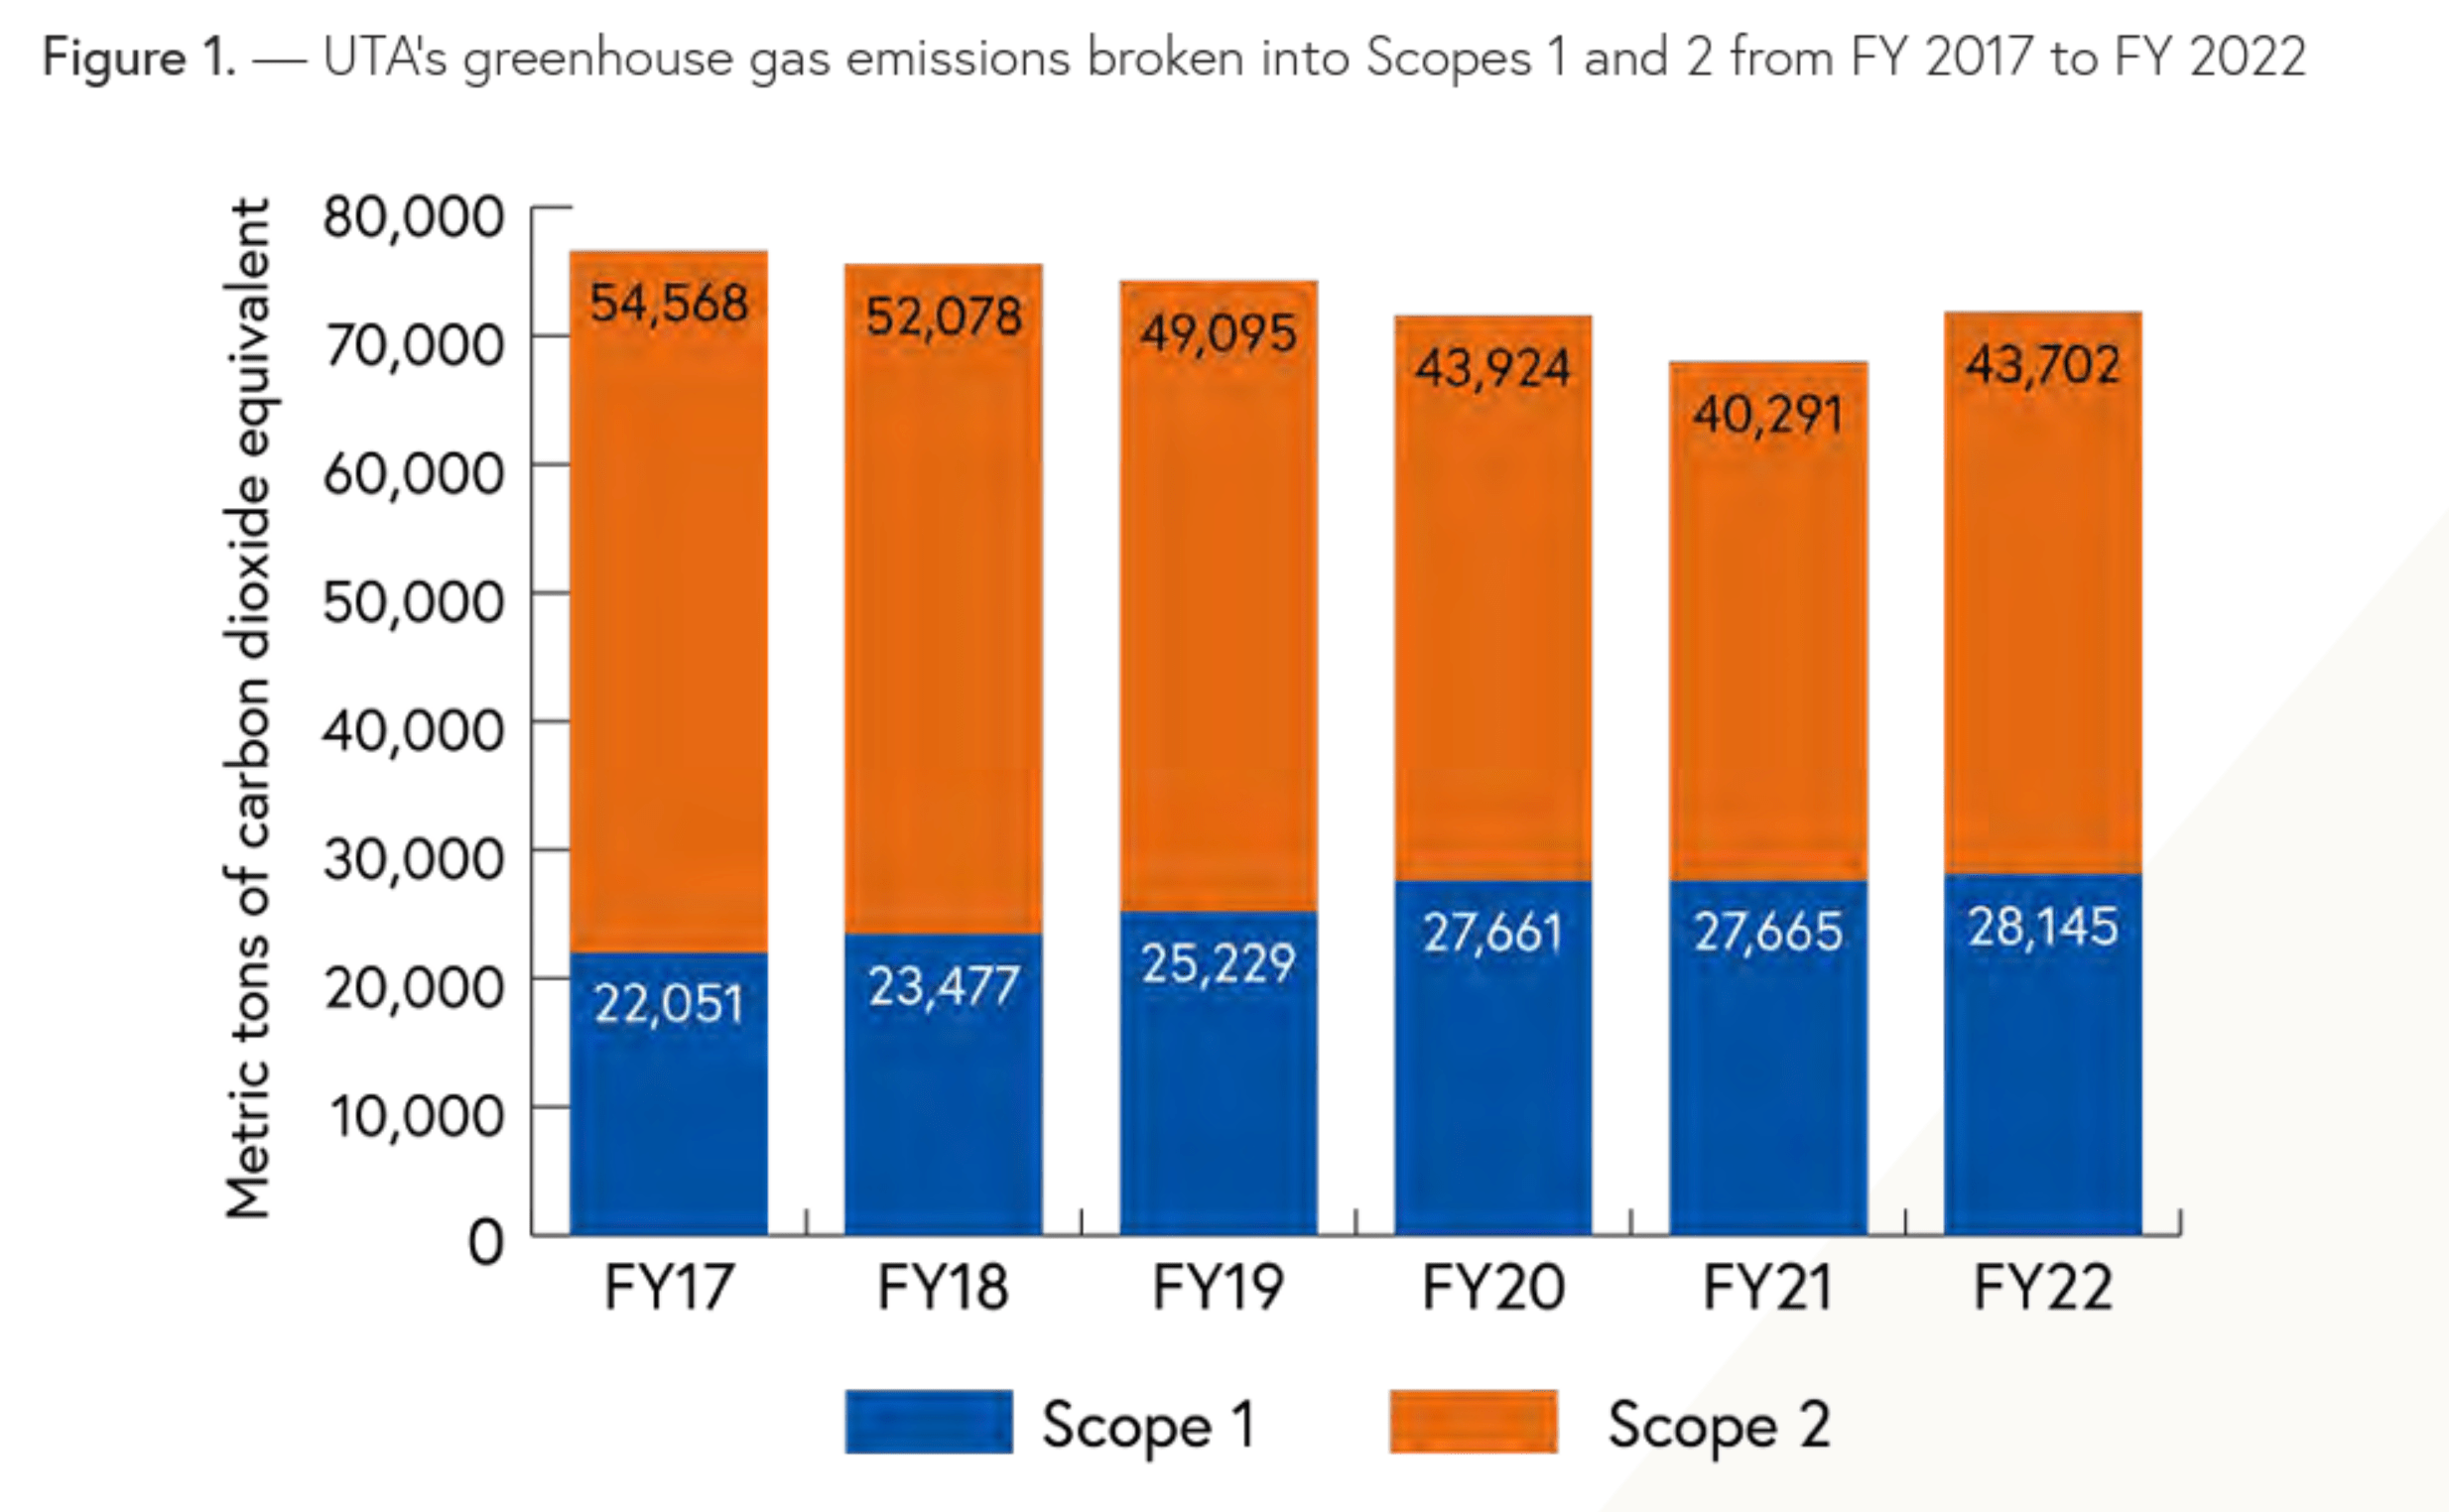 UTA's Greenhouse Gas Emissions Broken into Scopes 1 and 2 from FY 2017 to FY 2022